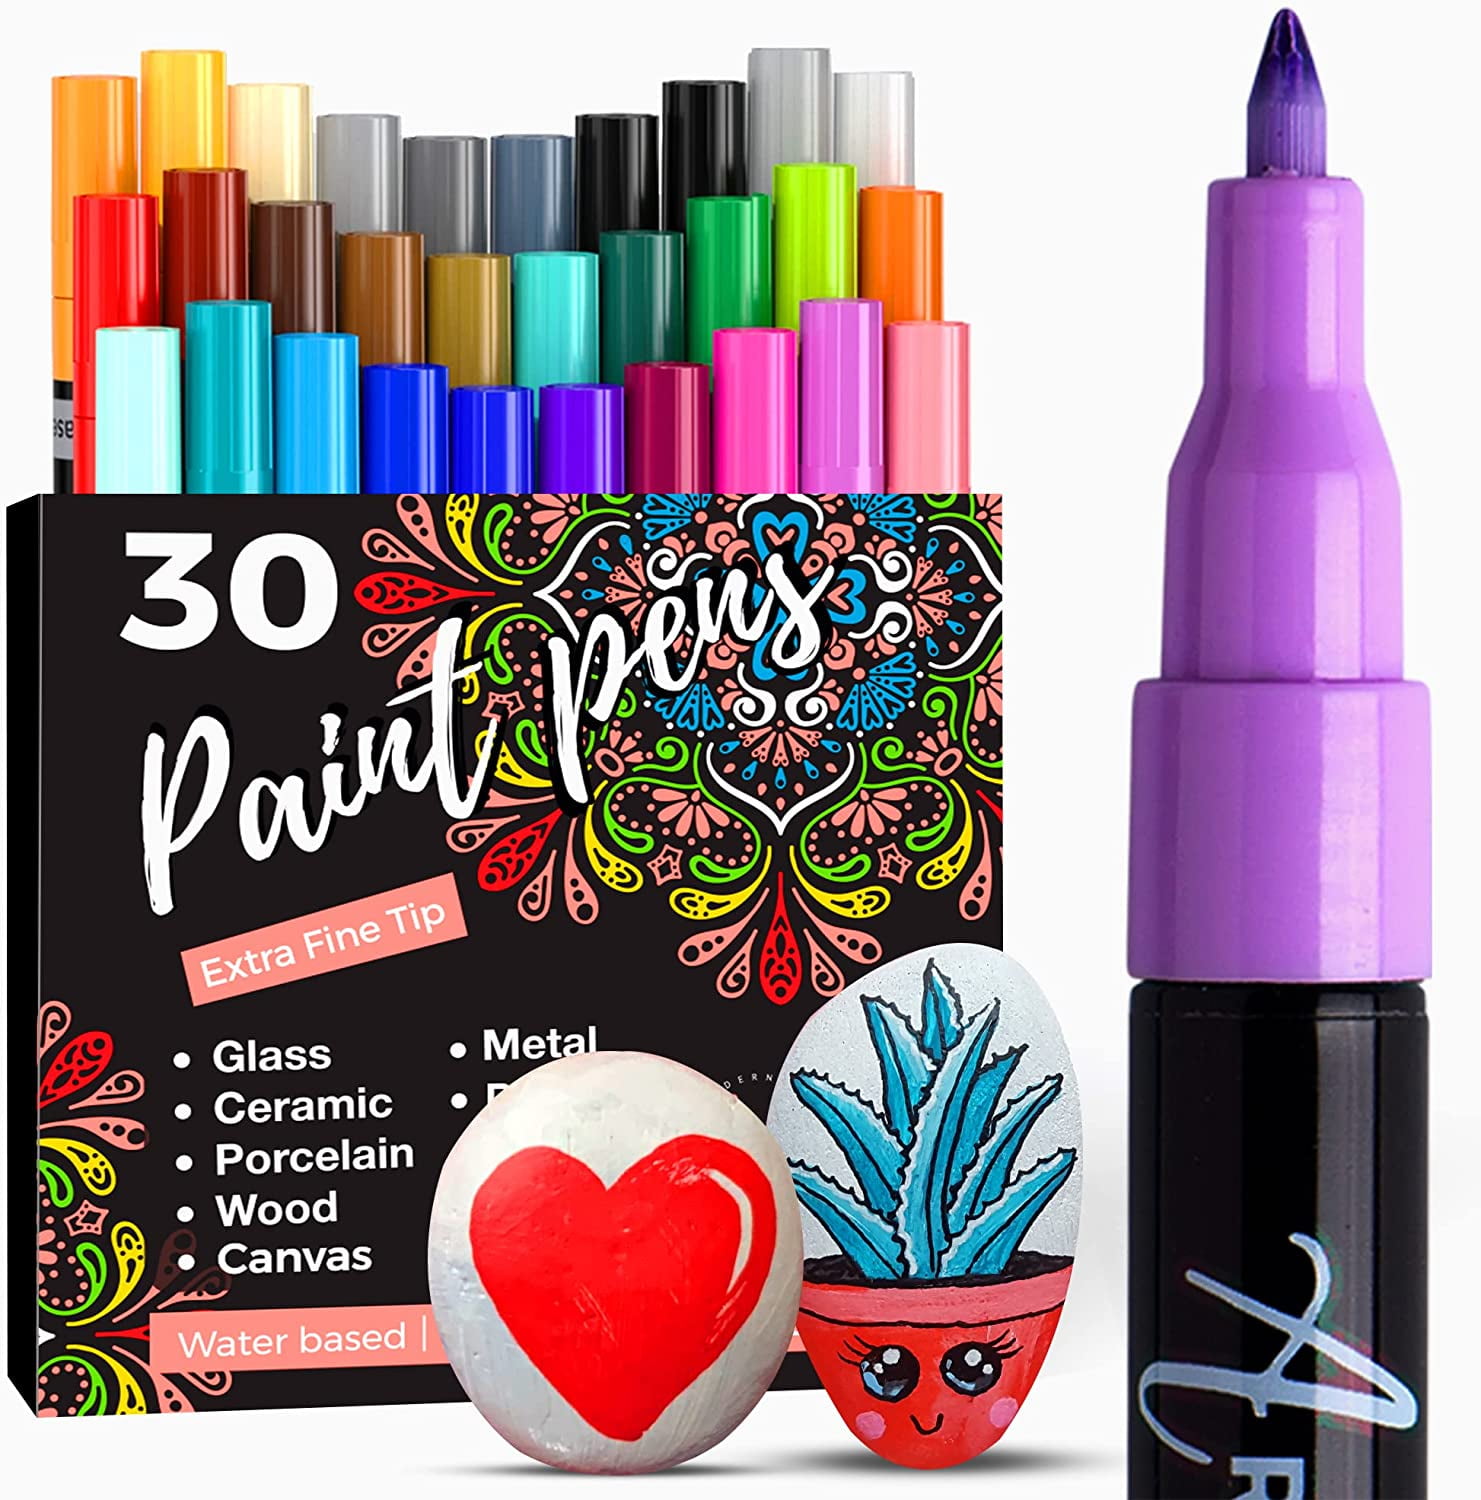 ARTISTRO 16 Acrylic Paint Pens Brush Tip and 30 Acrylic Paint Pens Extra  Fine Tip, Bundle for Calligraphy, Scrapbooking, Brush Lettering, Card  Making